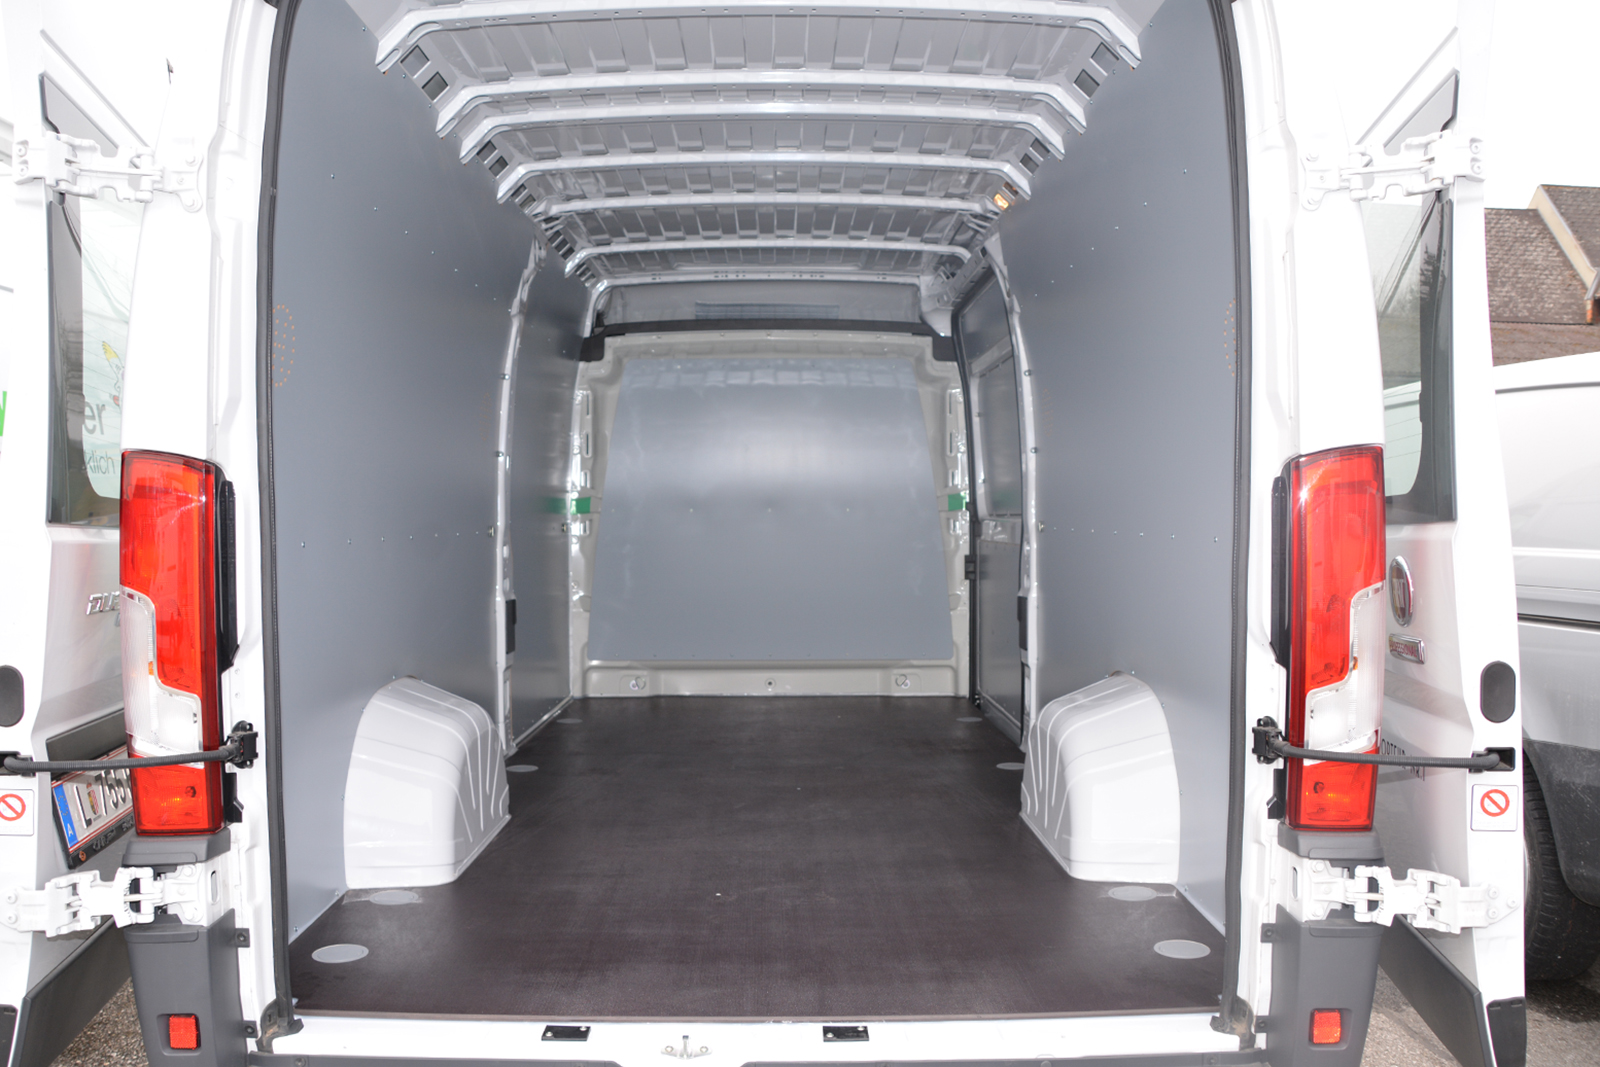 haselberger_fiat_ducato_31